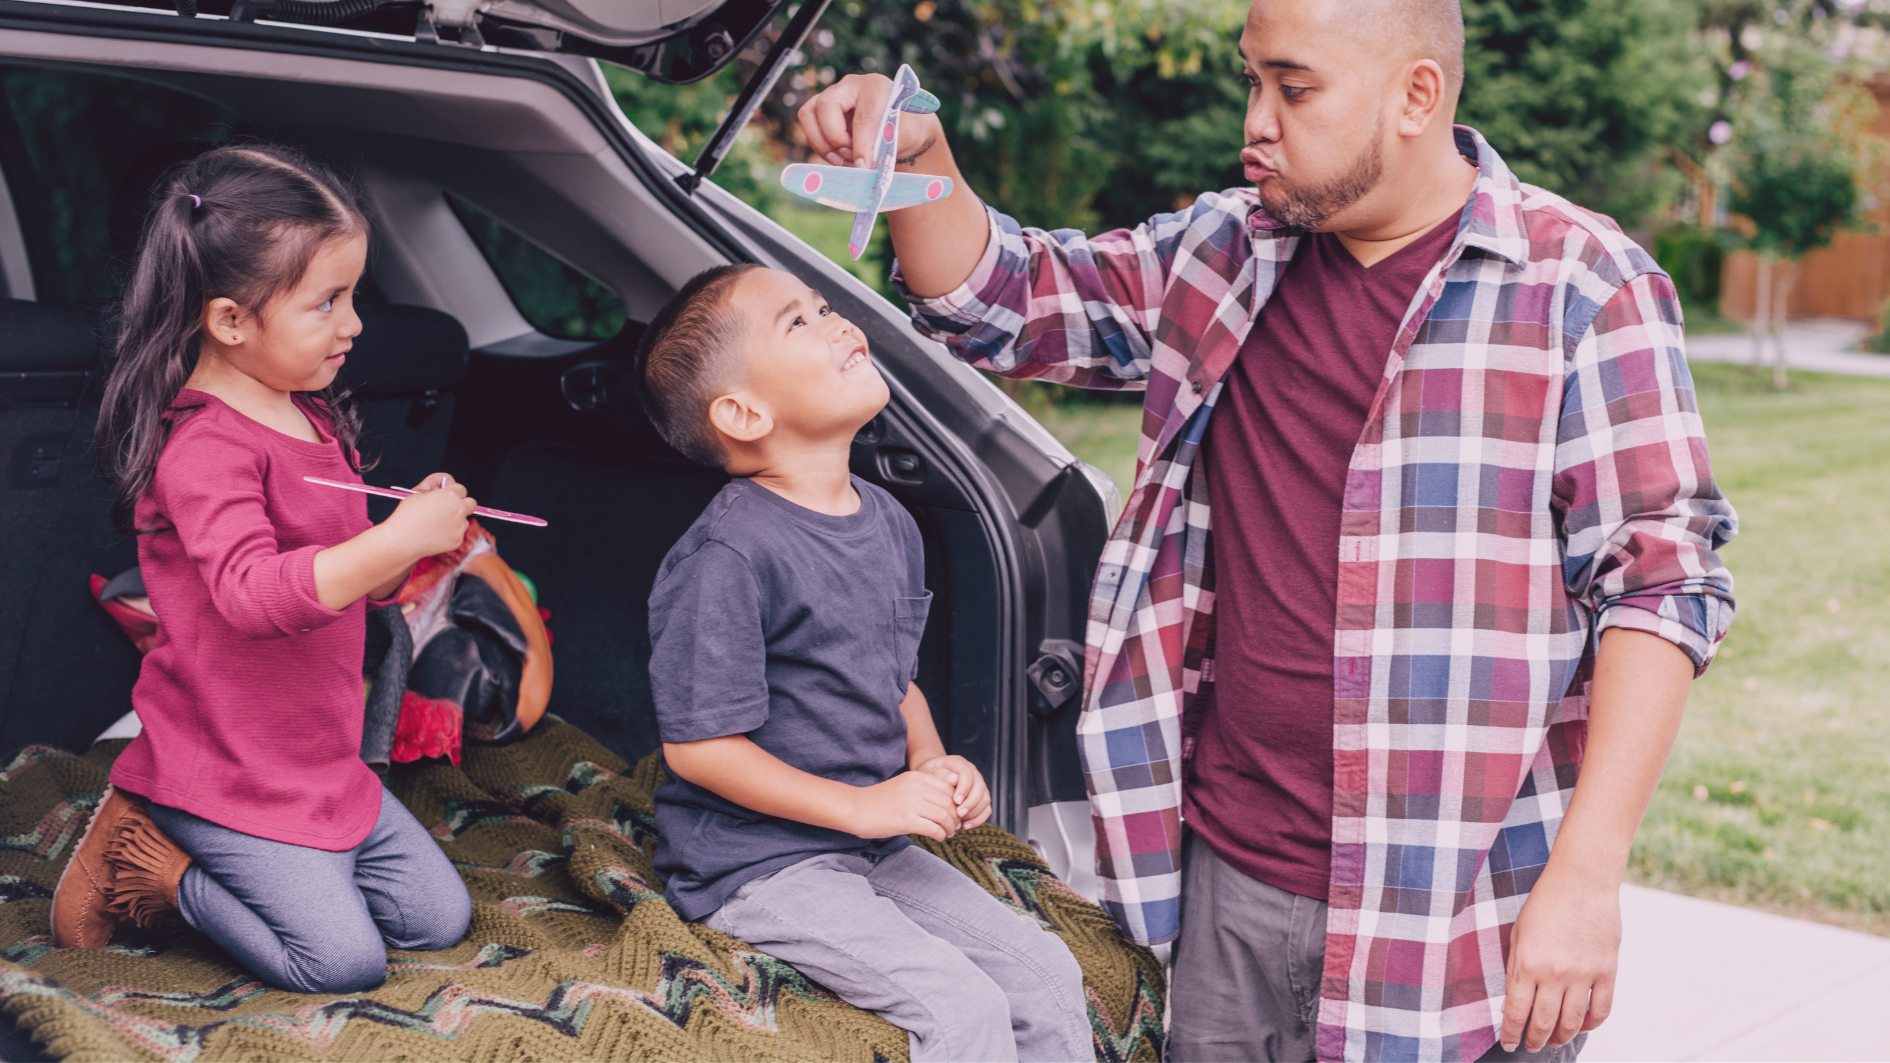 5 Tips to Have Fun Road Trips with Kids - iKids